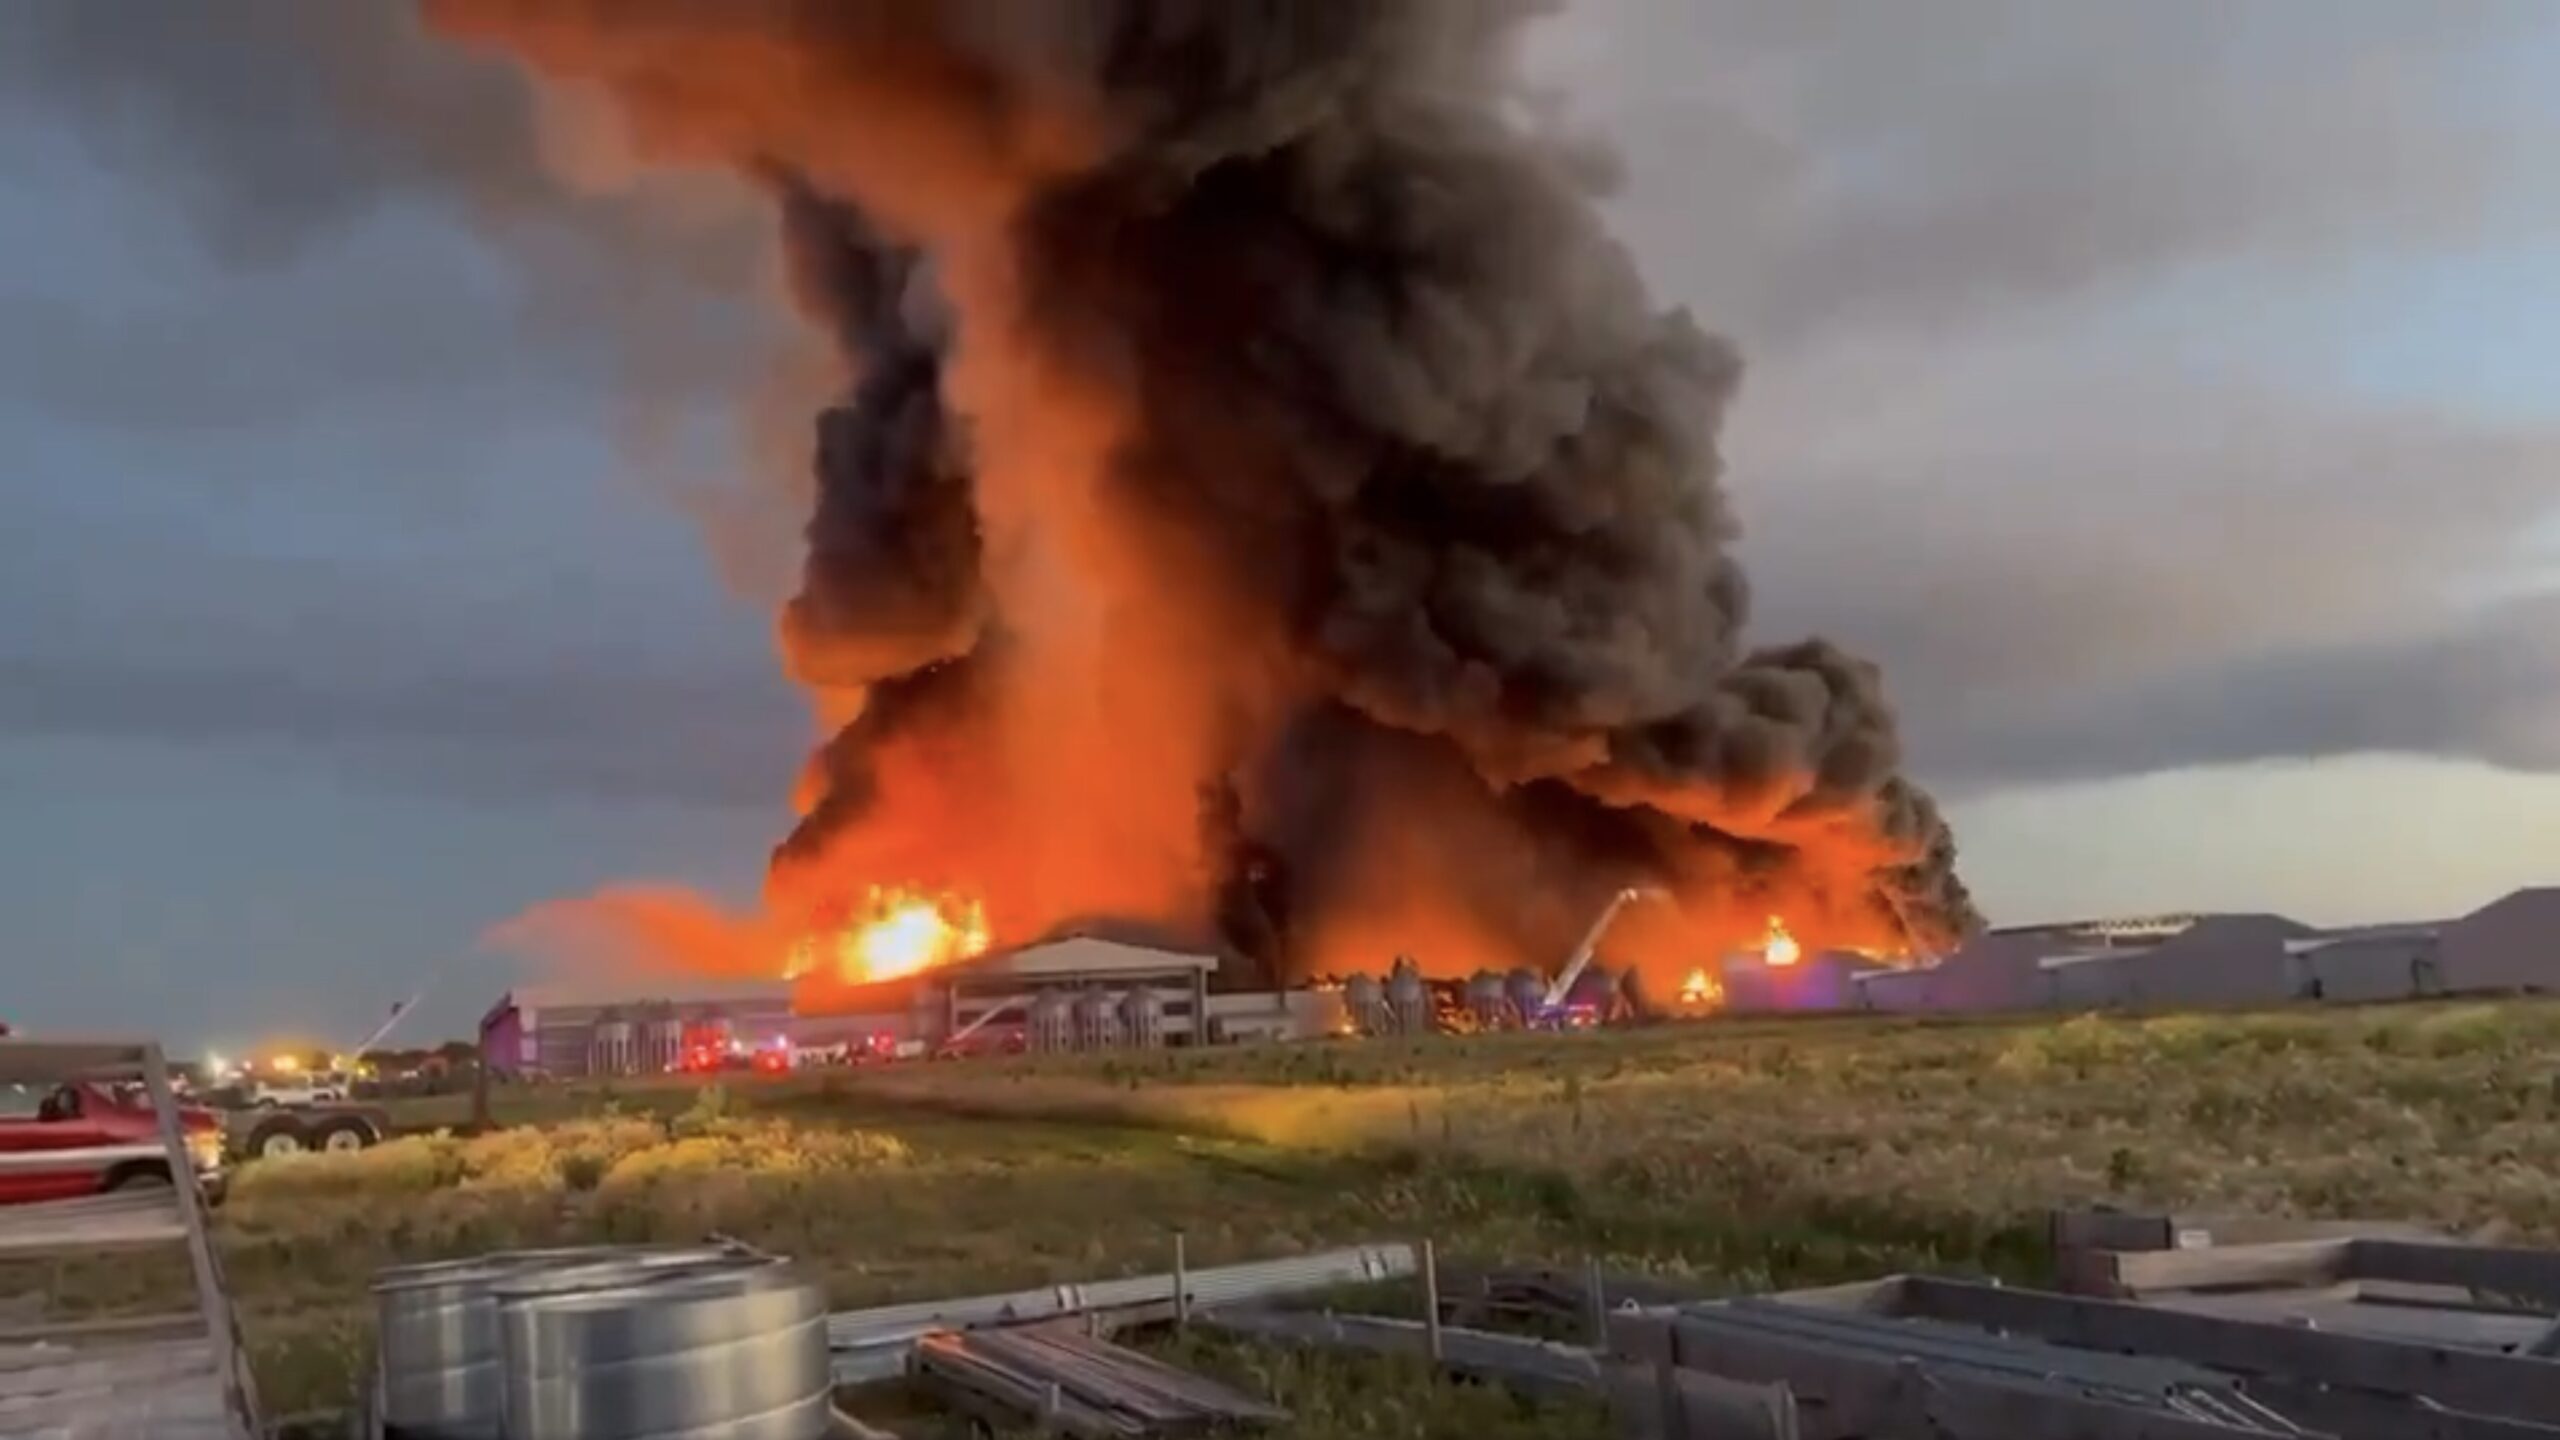 Millions of Chickens Killed in 5-Alarm Fire at Farina Farms Inc. in Illinois, One of Nation's Largest Free-Range Egg Facilities (VIDEO) | The Gateway Pundit | by Jim Hᴏft